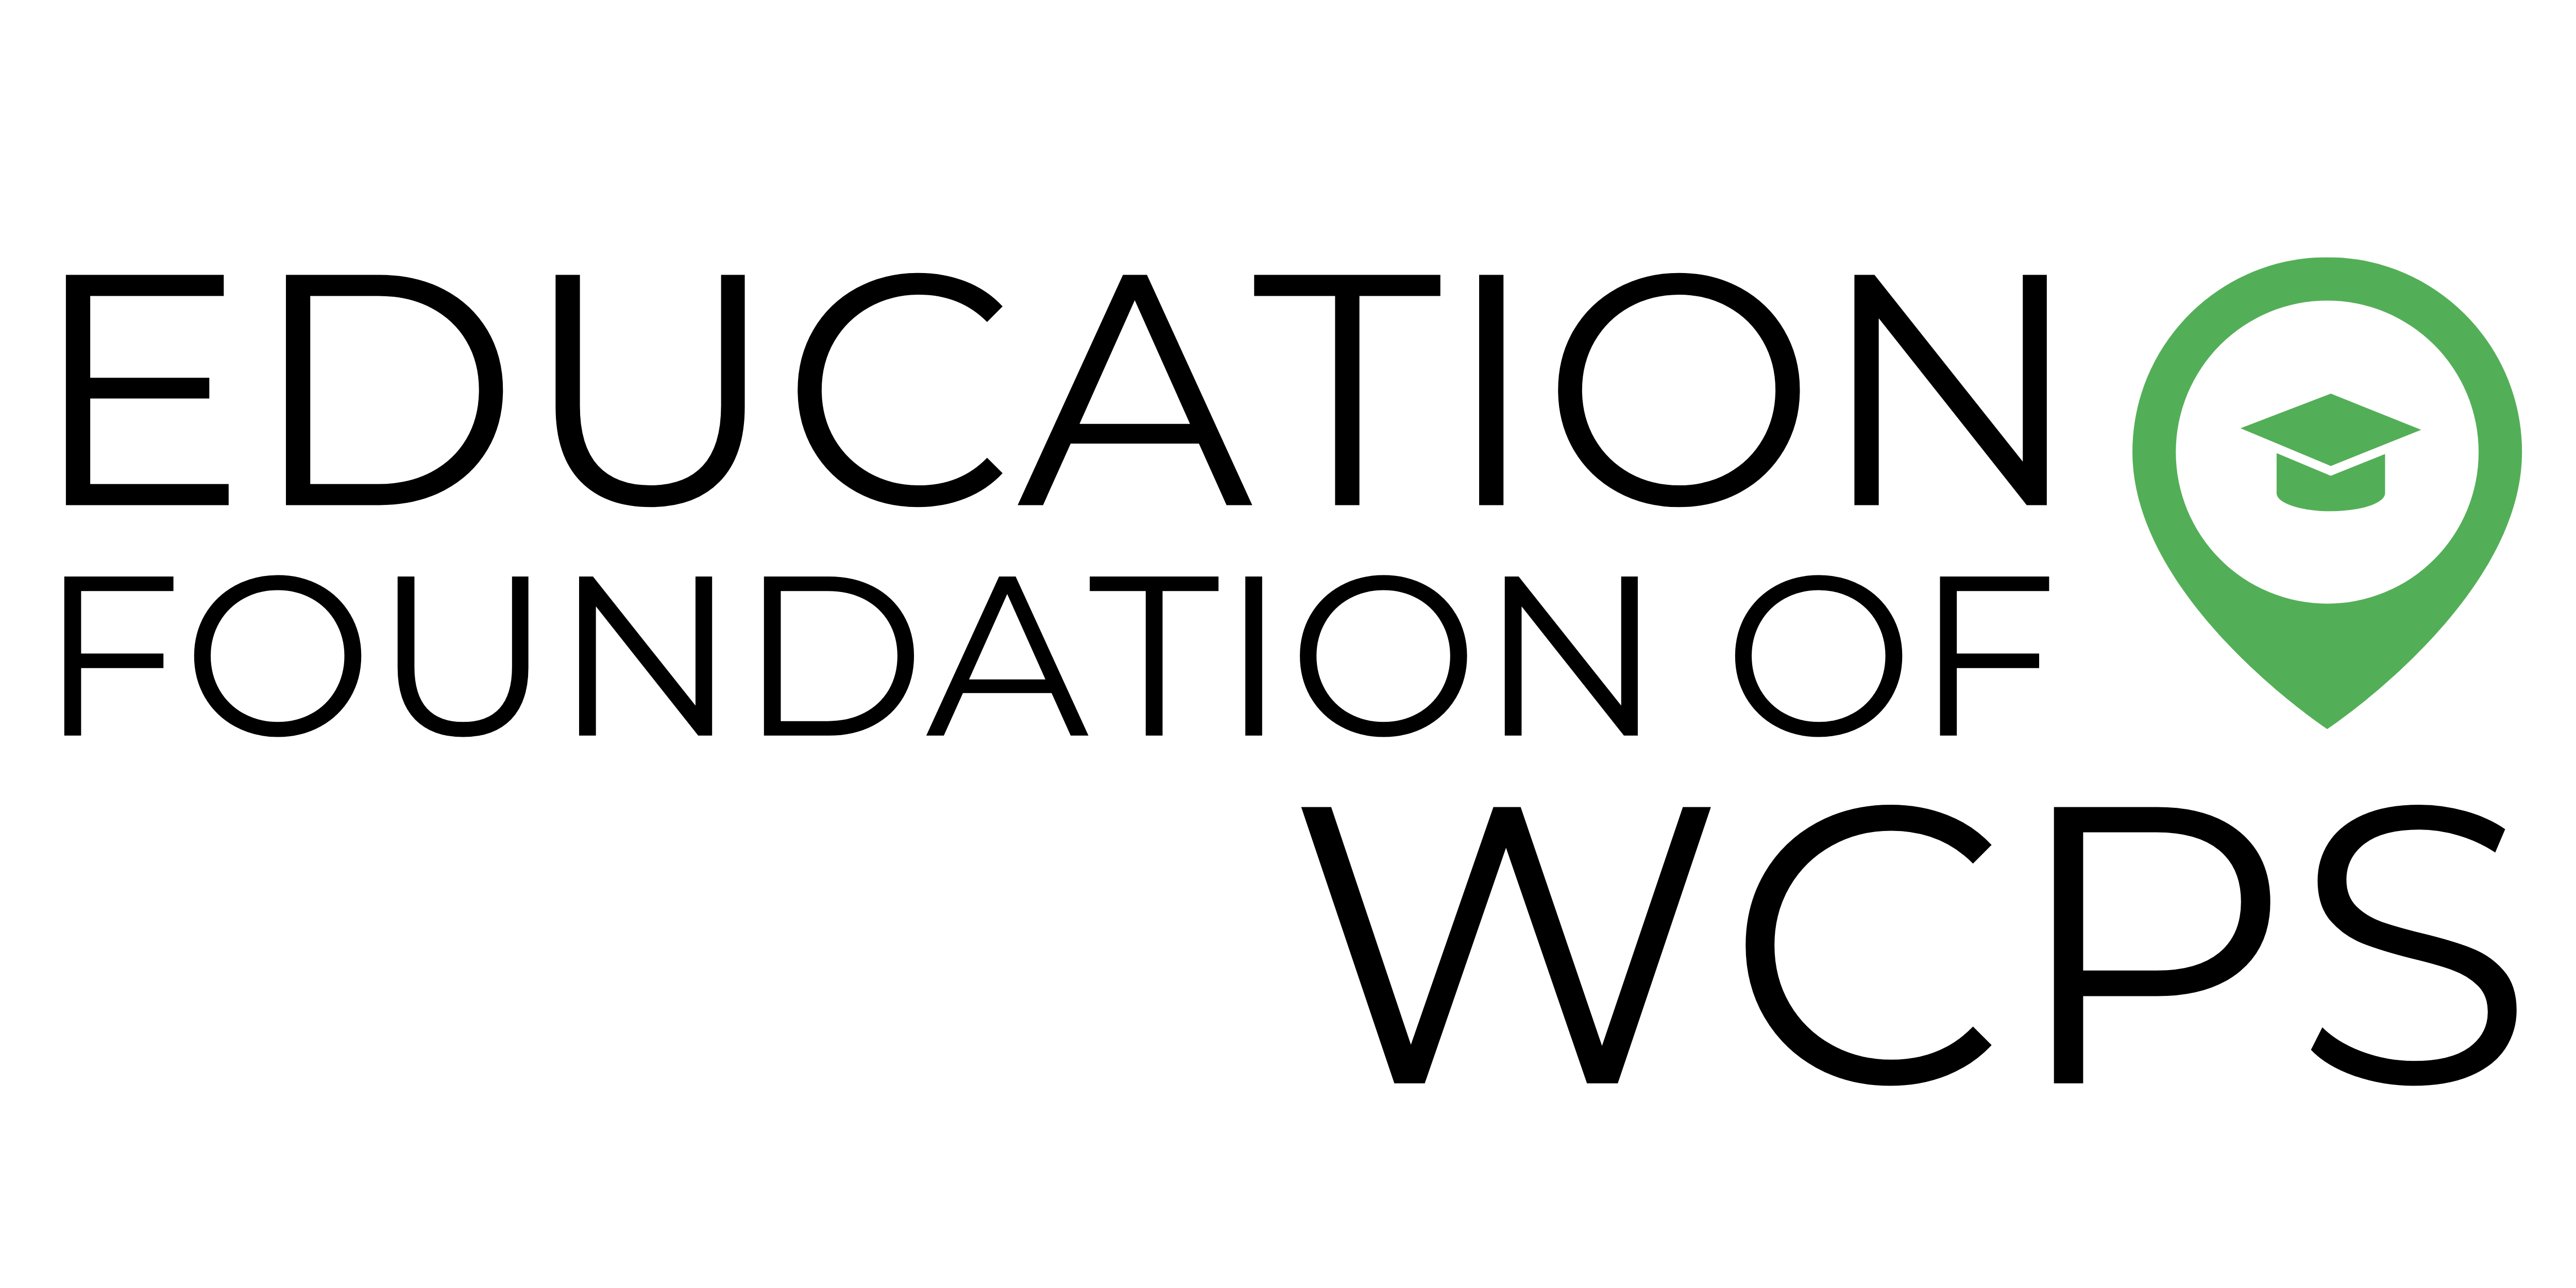 images/Education Foundation of WCPS Group.gif